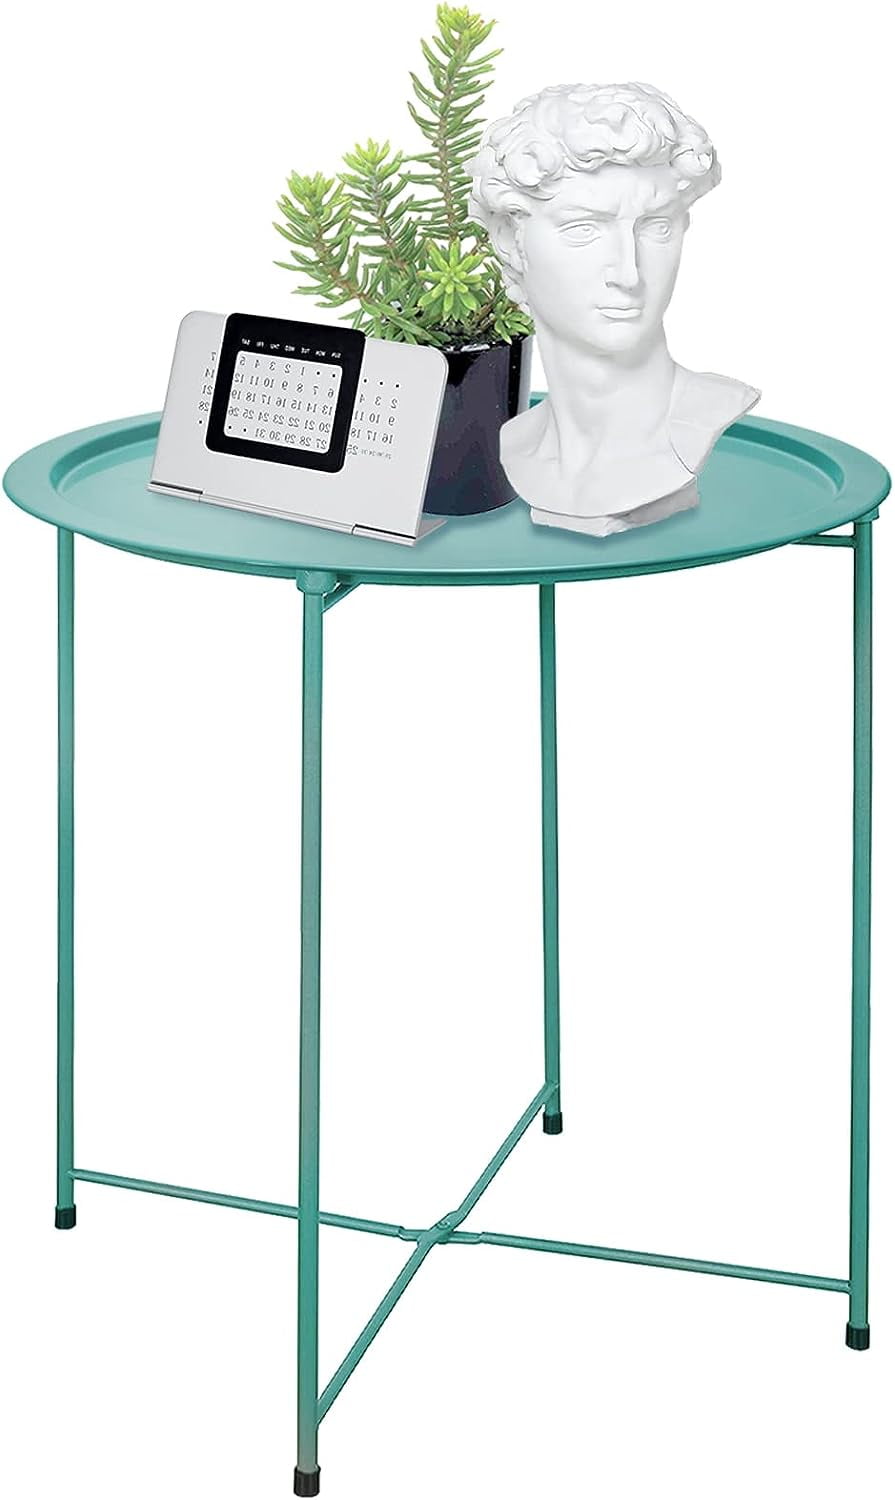 Garden 4 you Folding Tray Metal Side Table Blue Round End Table Cyan Sofa Small Accent Fold-able Table, Round End Table Tray, Next to Sofa Table, Snack Table for Living Room and Bed Room